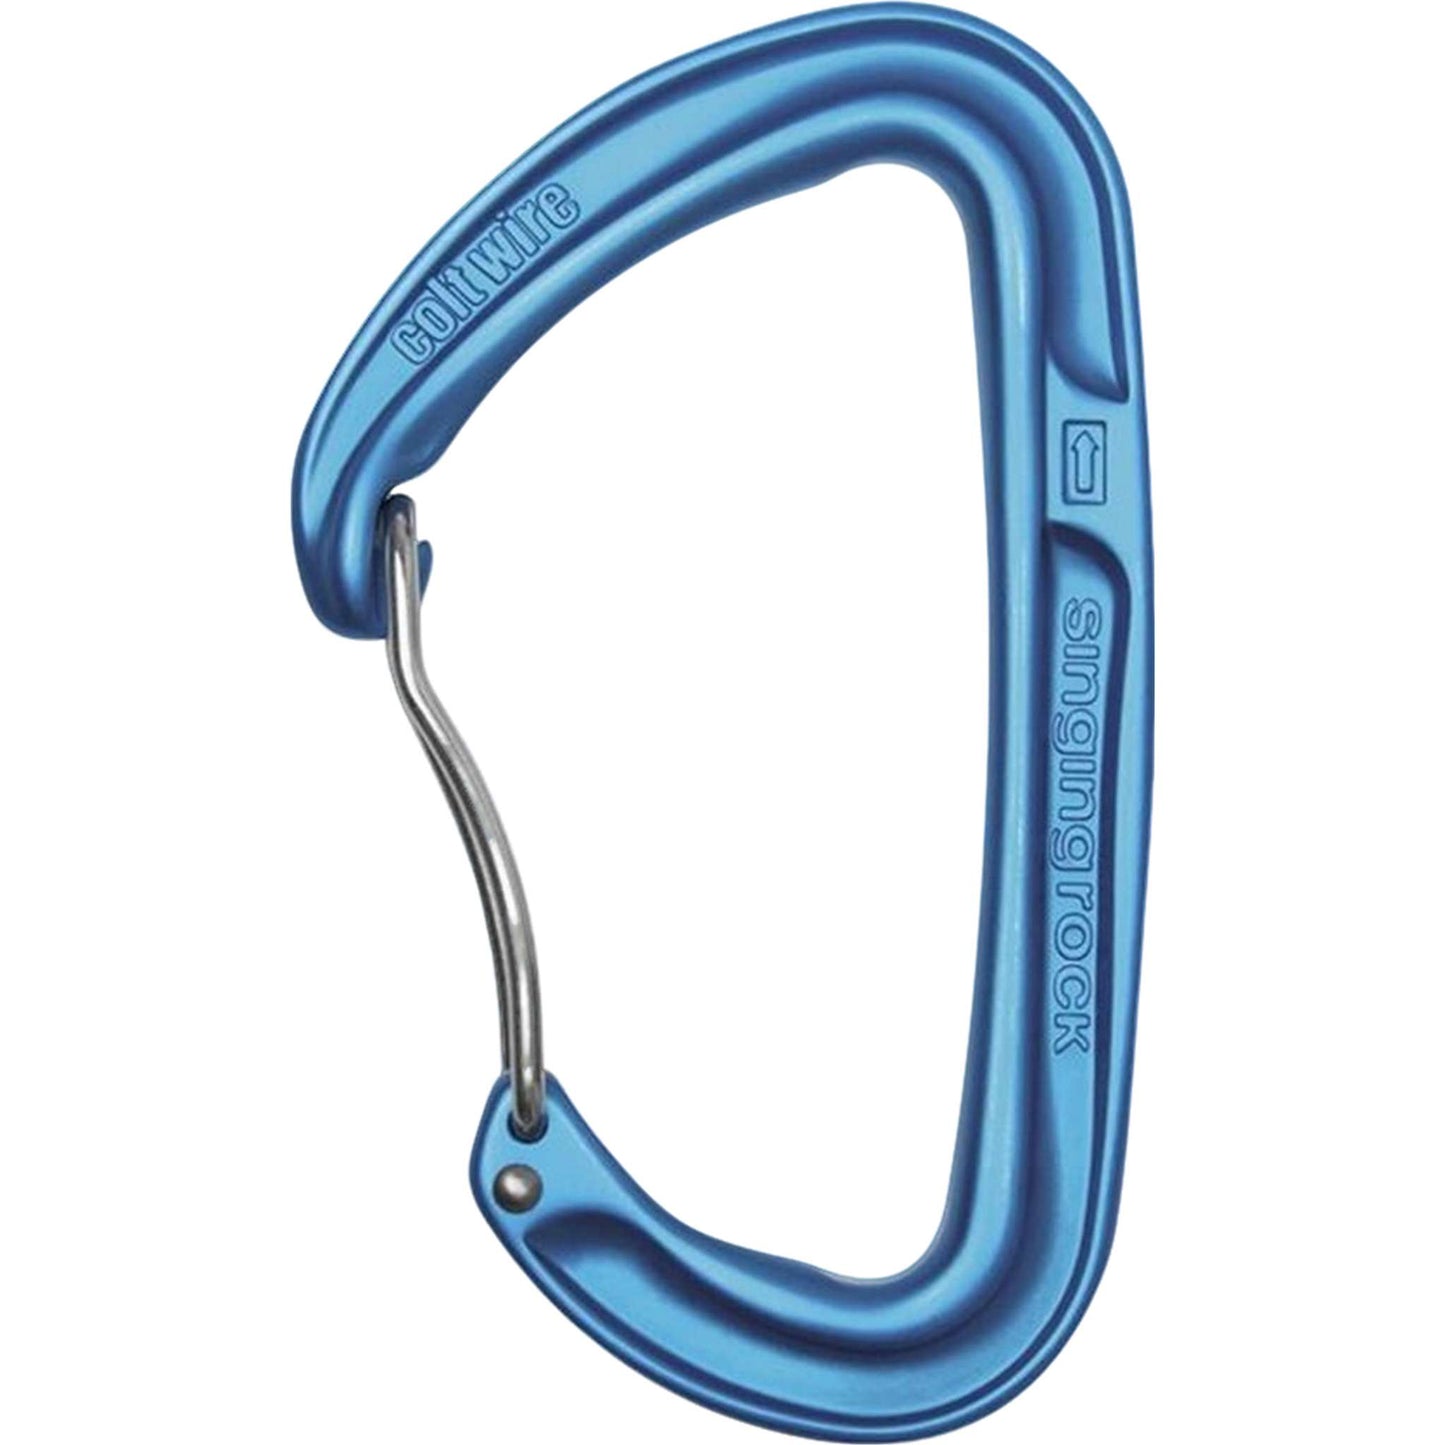 Colt Wire Gate Carabiner - Full-Size, Hot Forged, Versatile for All Climbing Types